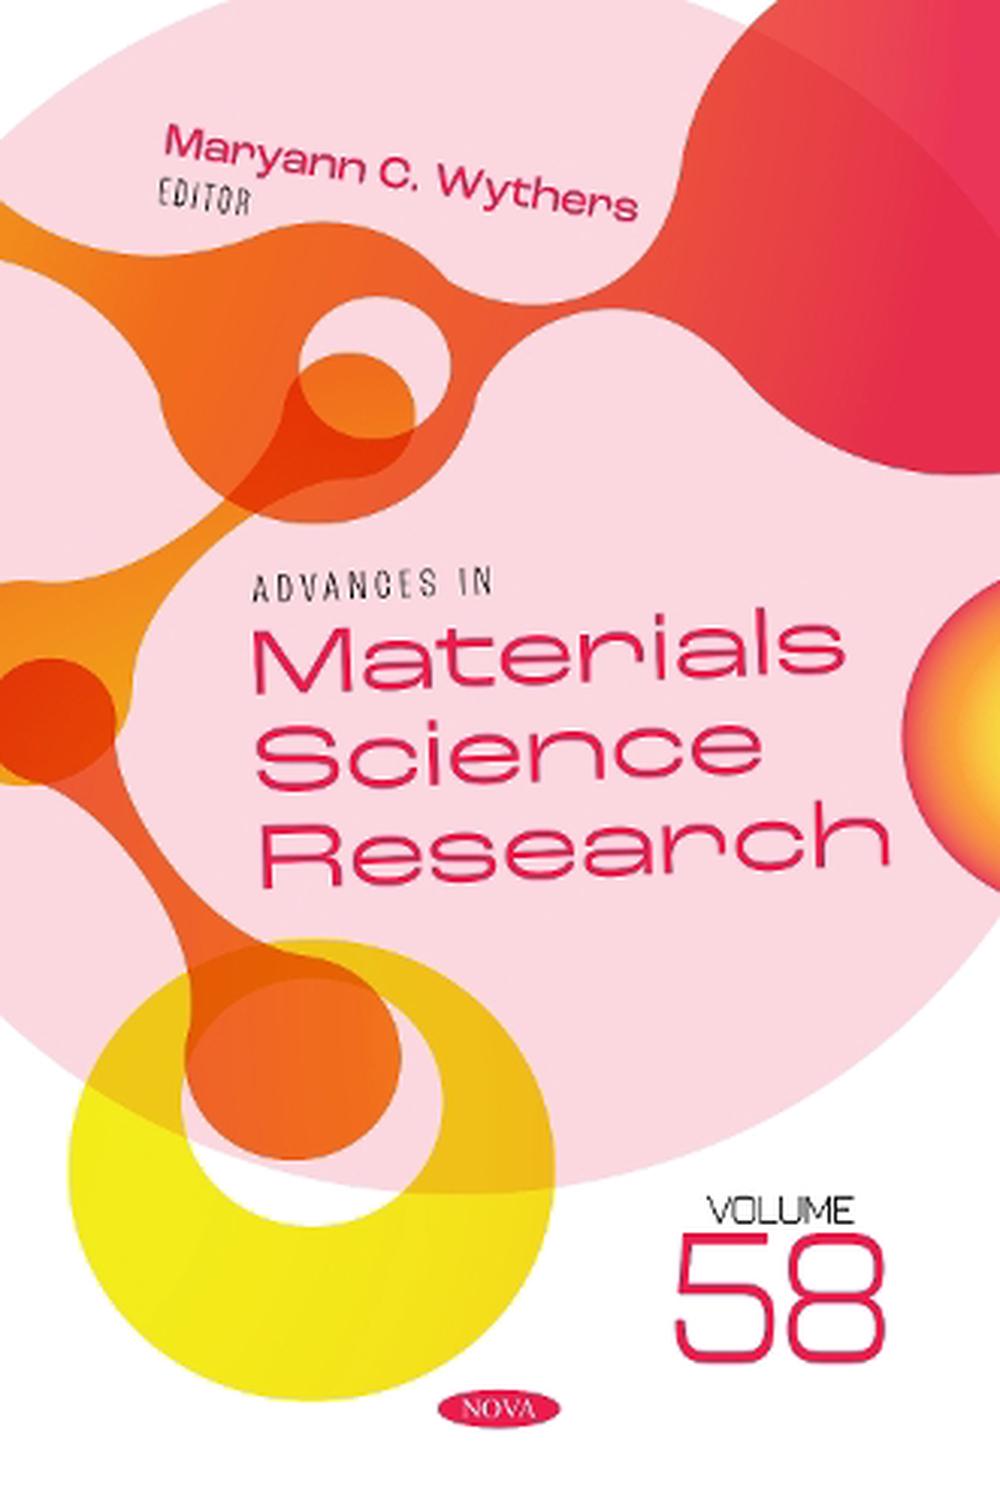 Advances in Materials Science Research. Volume 58 by Maryann C. Wythers (English - Picture 1 of 1